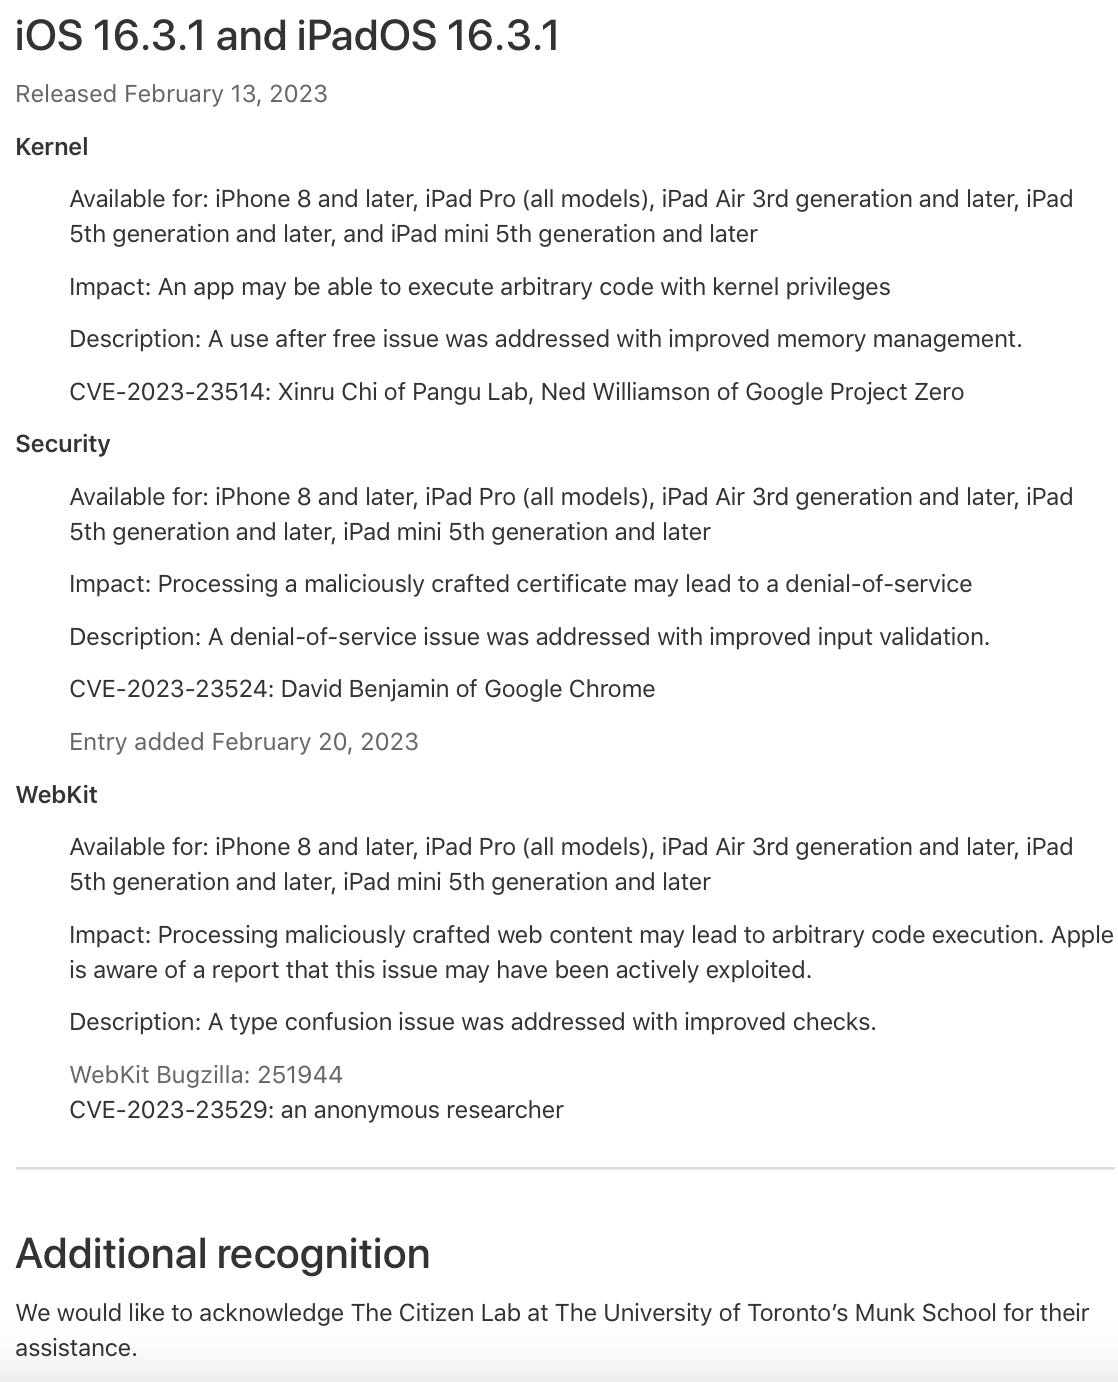 Apple acknowledges Citizen Lab’s assistance with the 16.3.1 security update. 